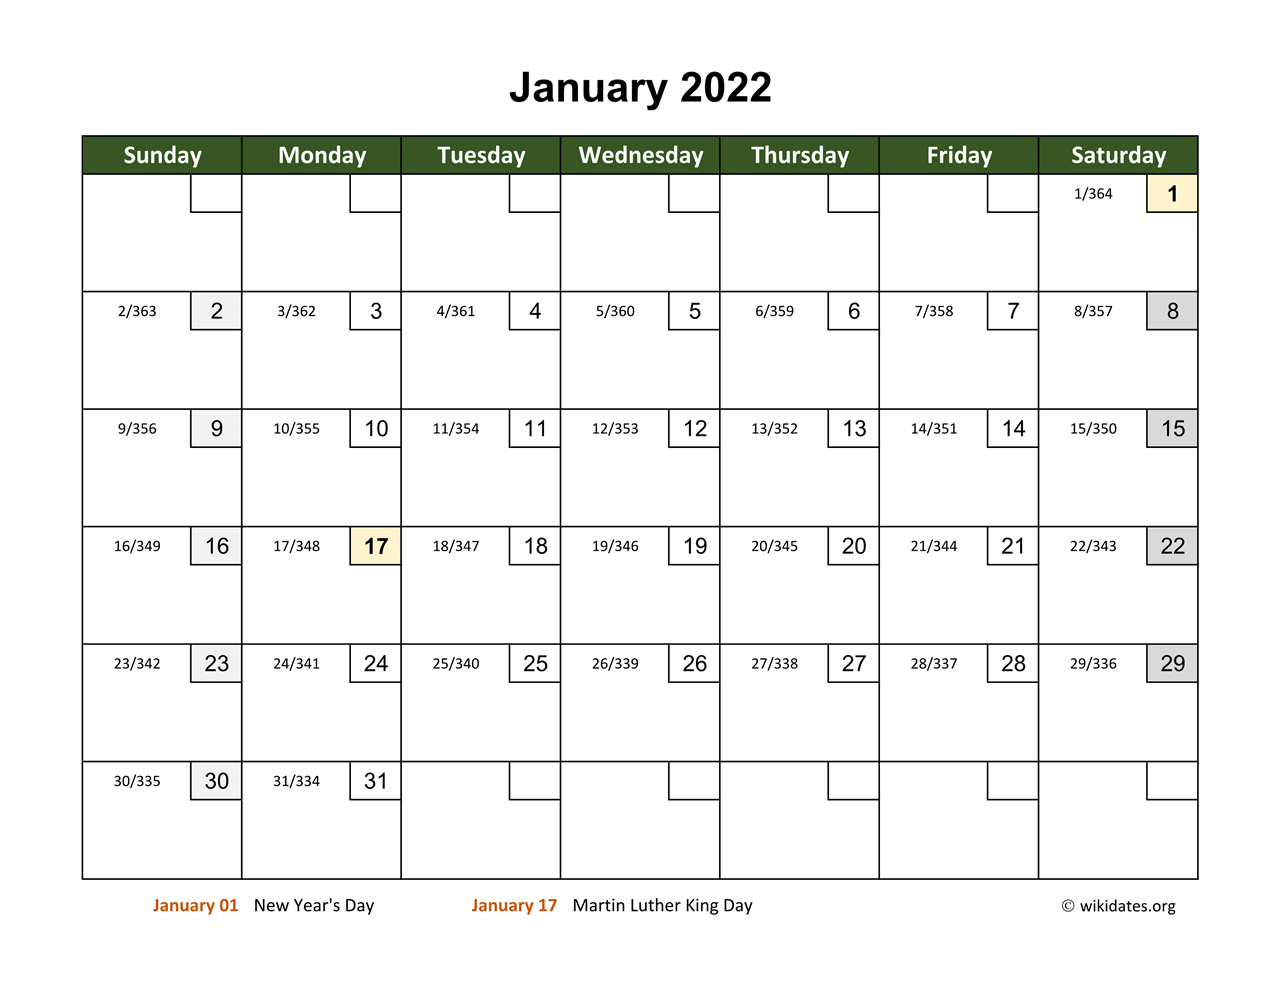 Day Of Year Calendar 2022 Monthly 2022 Calendar With Day Numbers | Wikidates.org